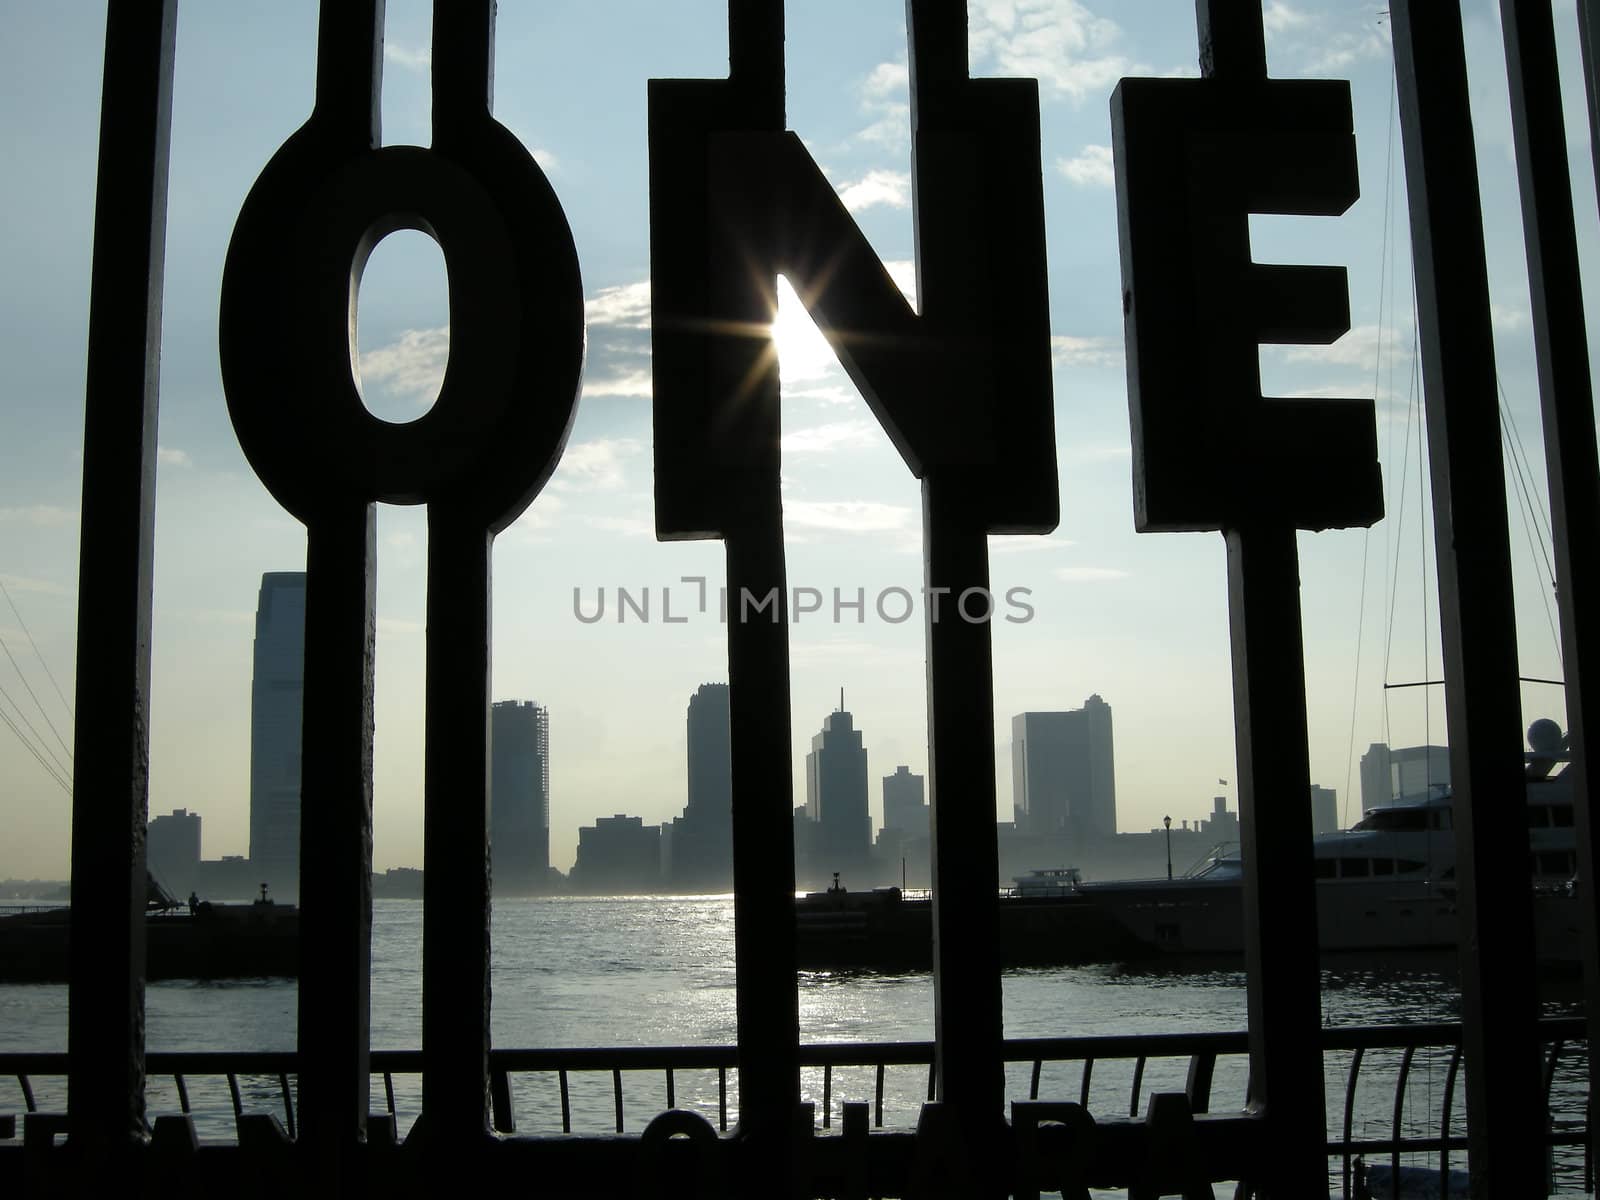 word ONE made as rail, photo taken in New York, New Jersey in distance